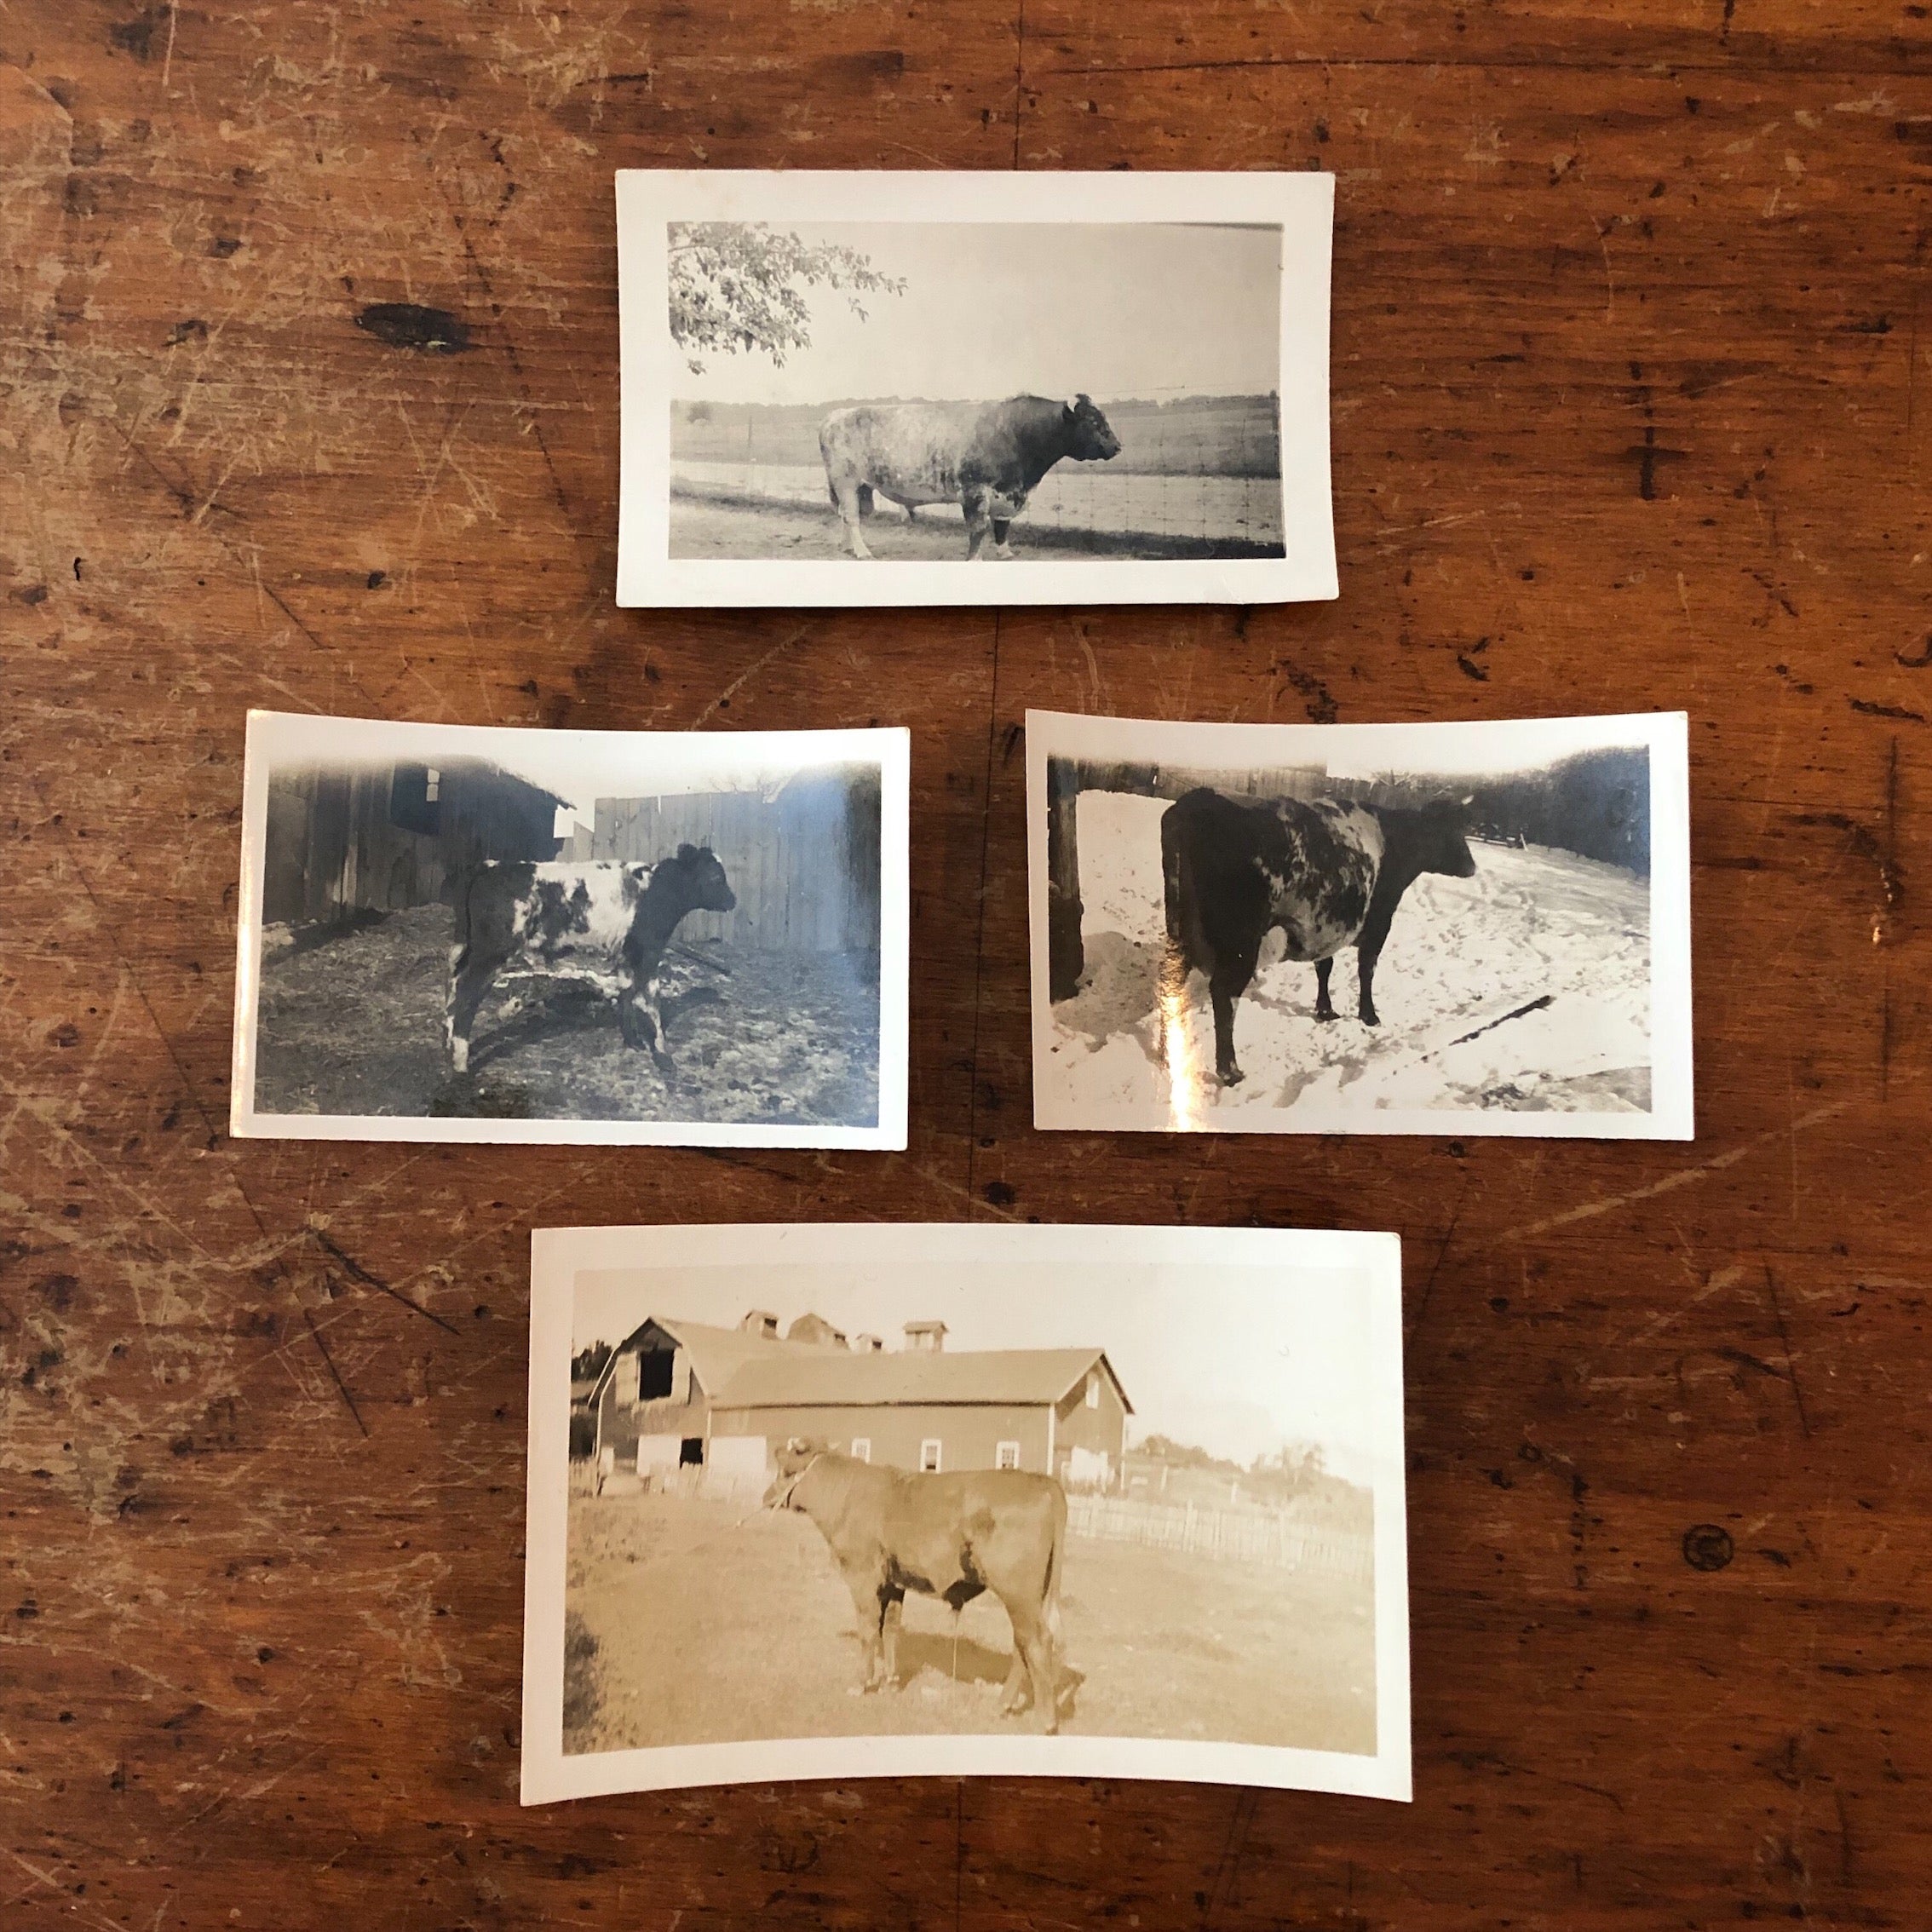 Antique Bovine Photograph Album - Early 1900s - James J. Hill? - Early Cow Photography